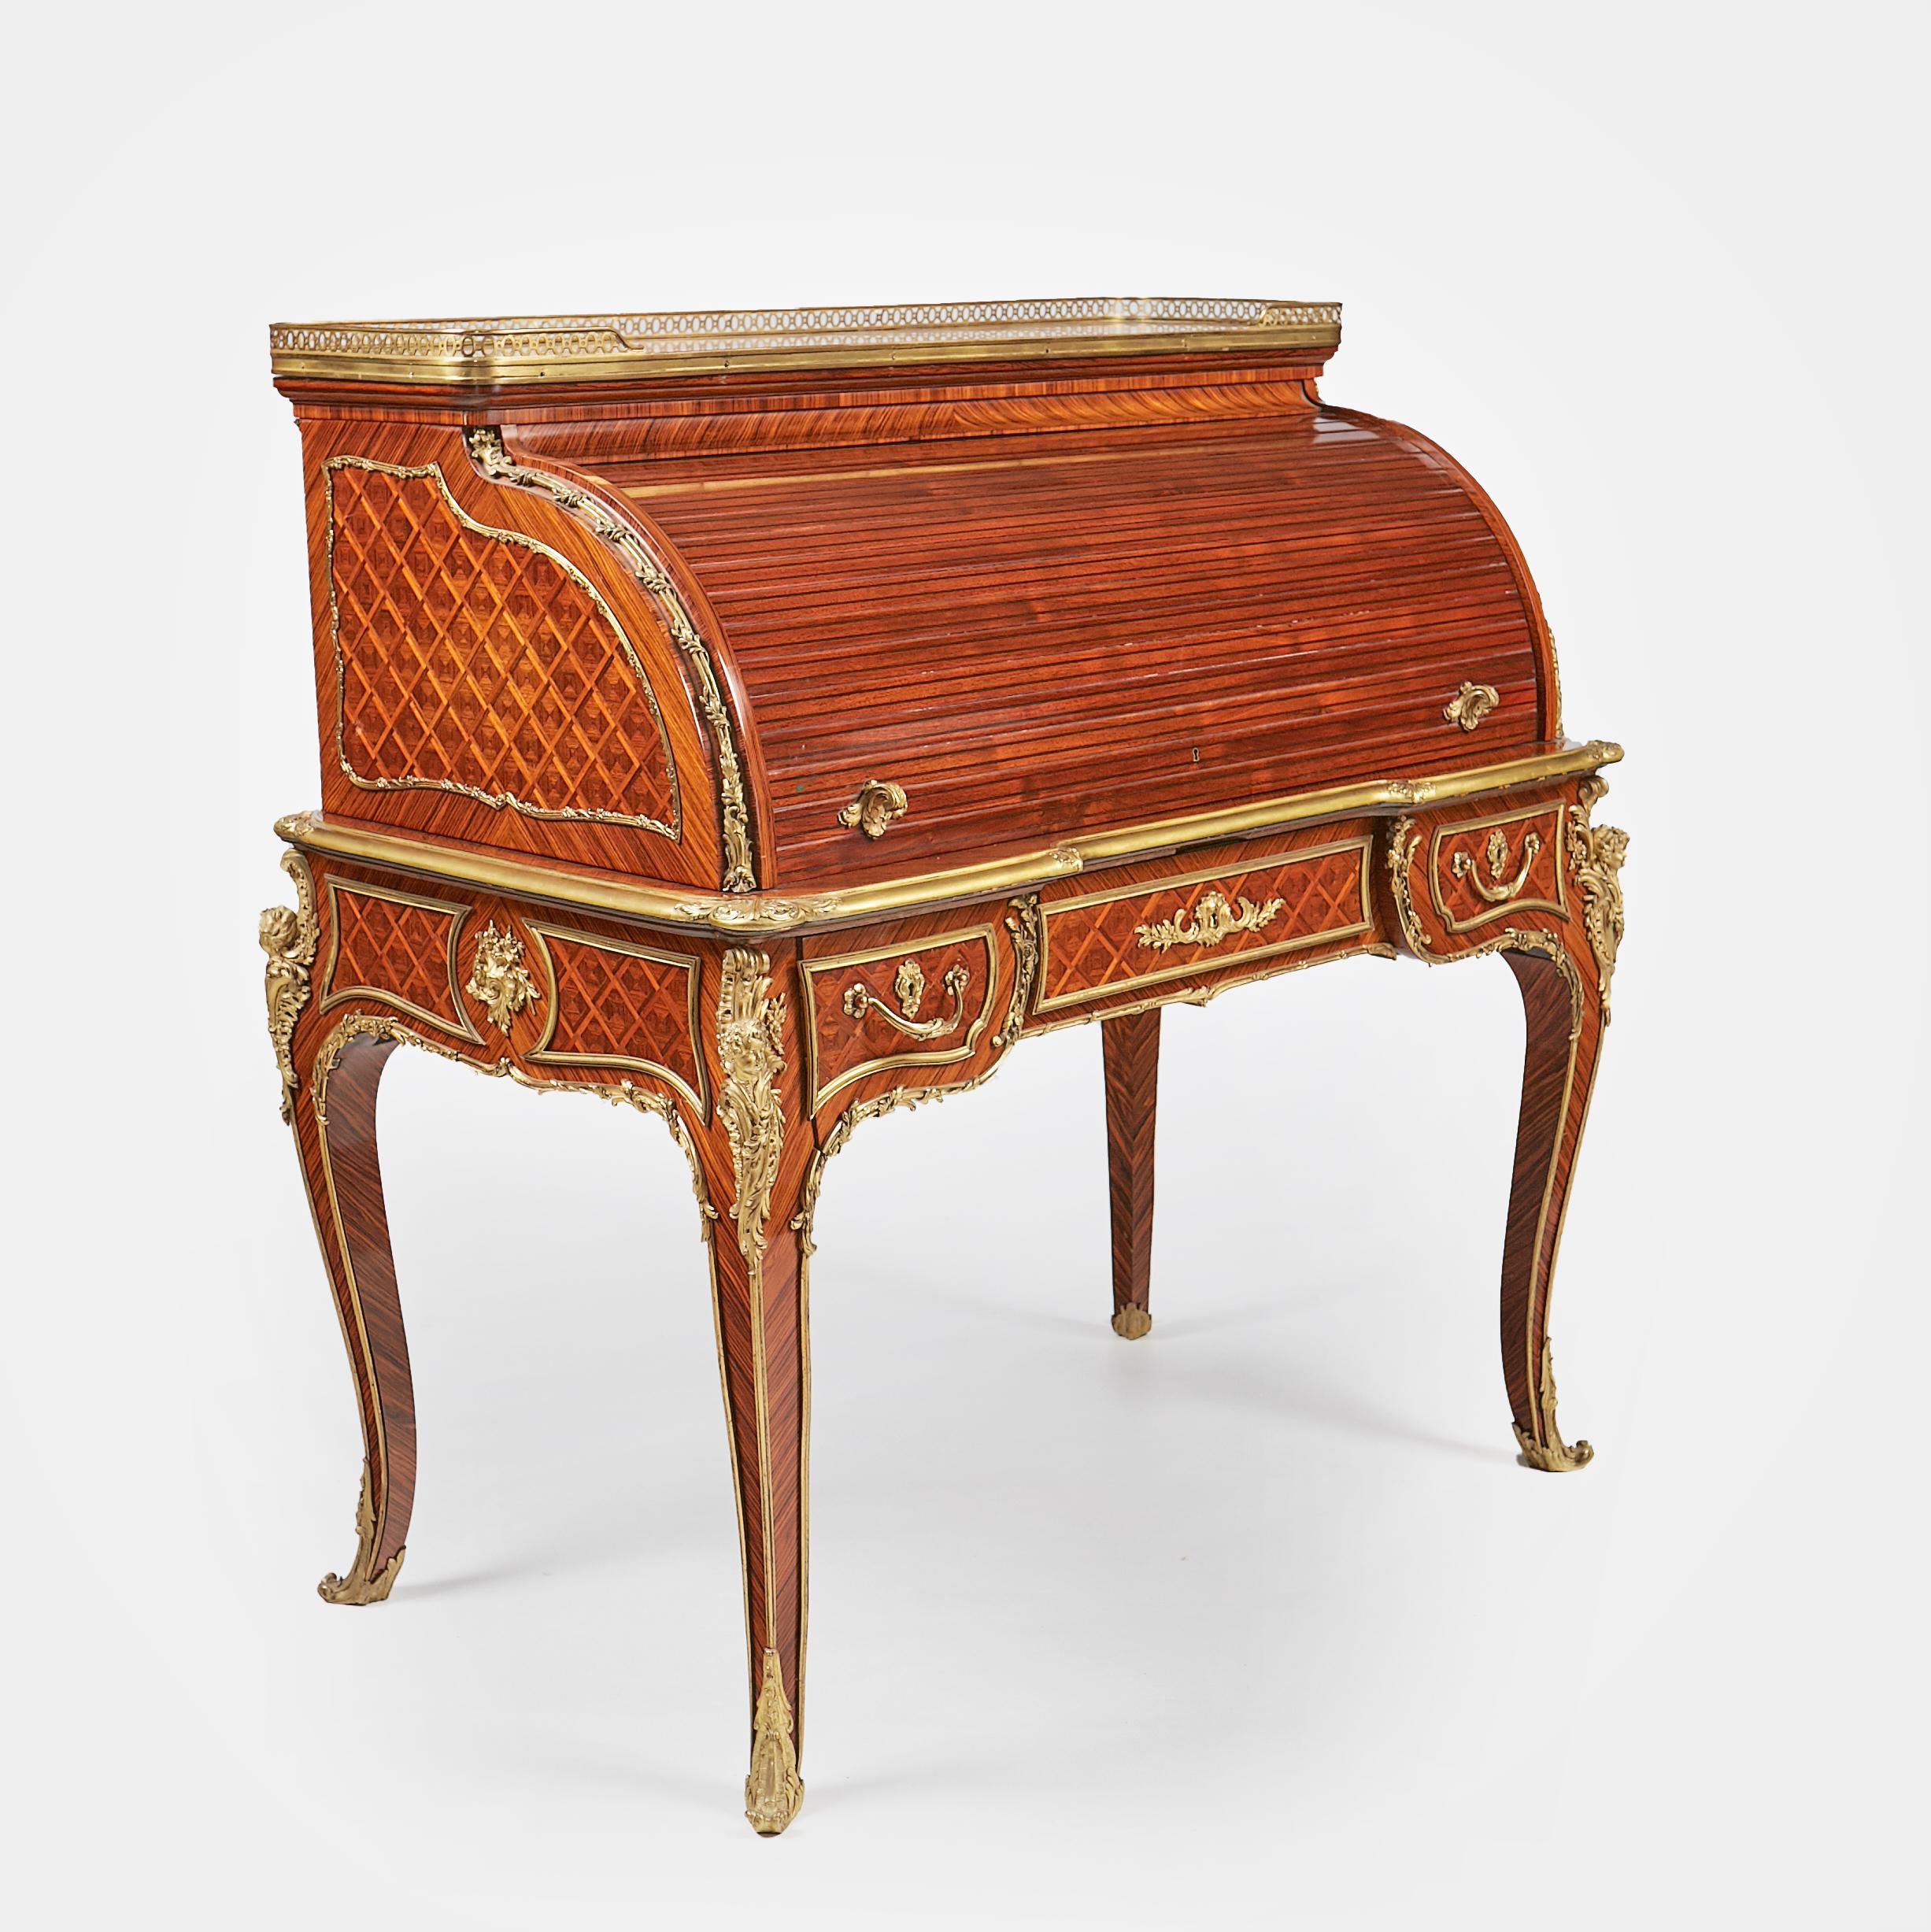 Belle Époque 19th Century French Kingwood & Parquetry Bureau à Cylindre Attributed To F.Linke For Sale